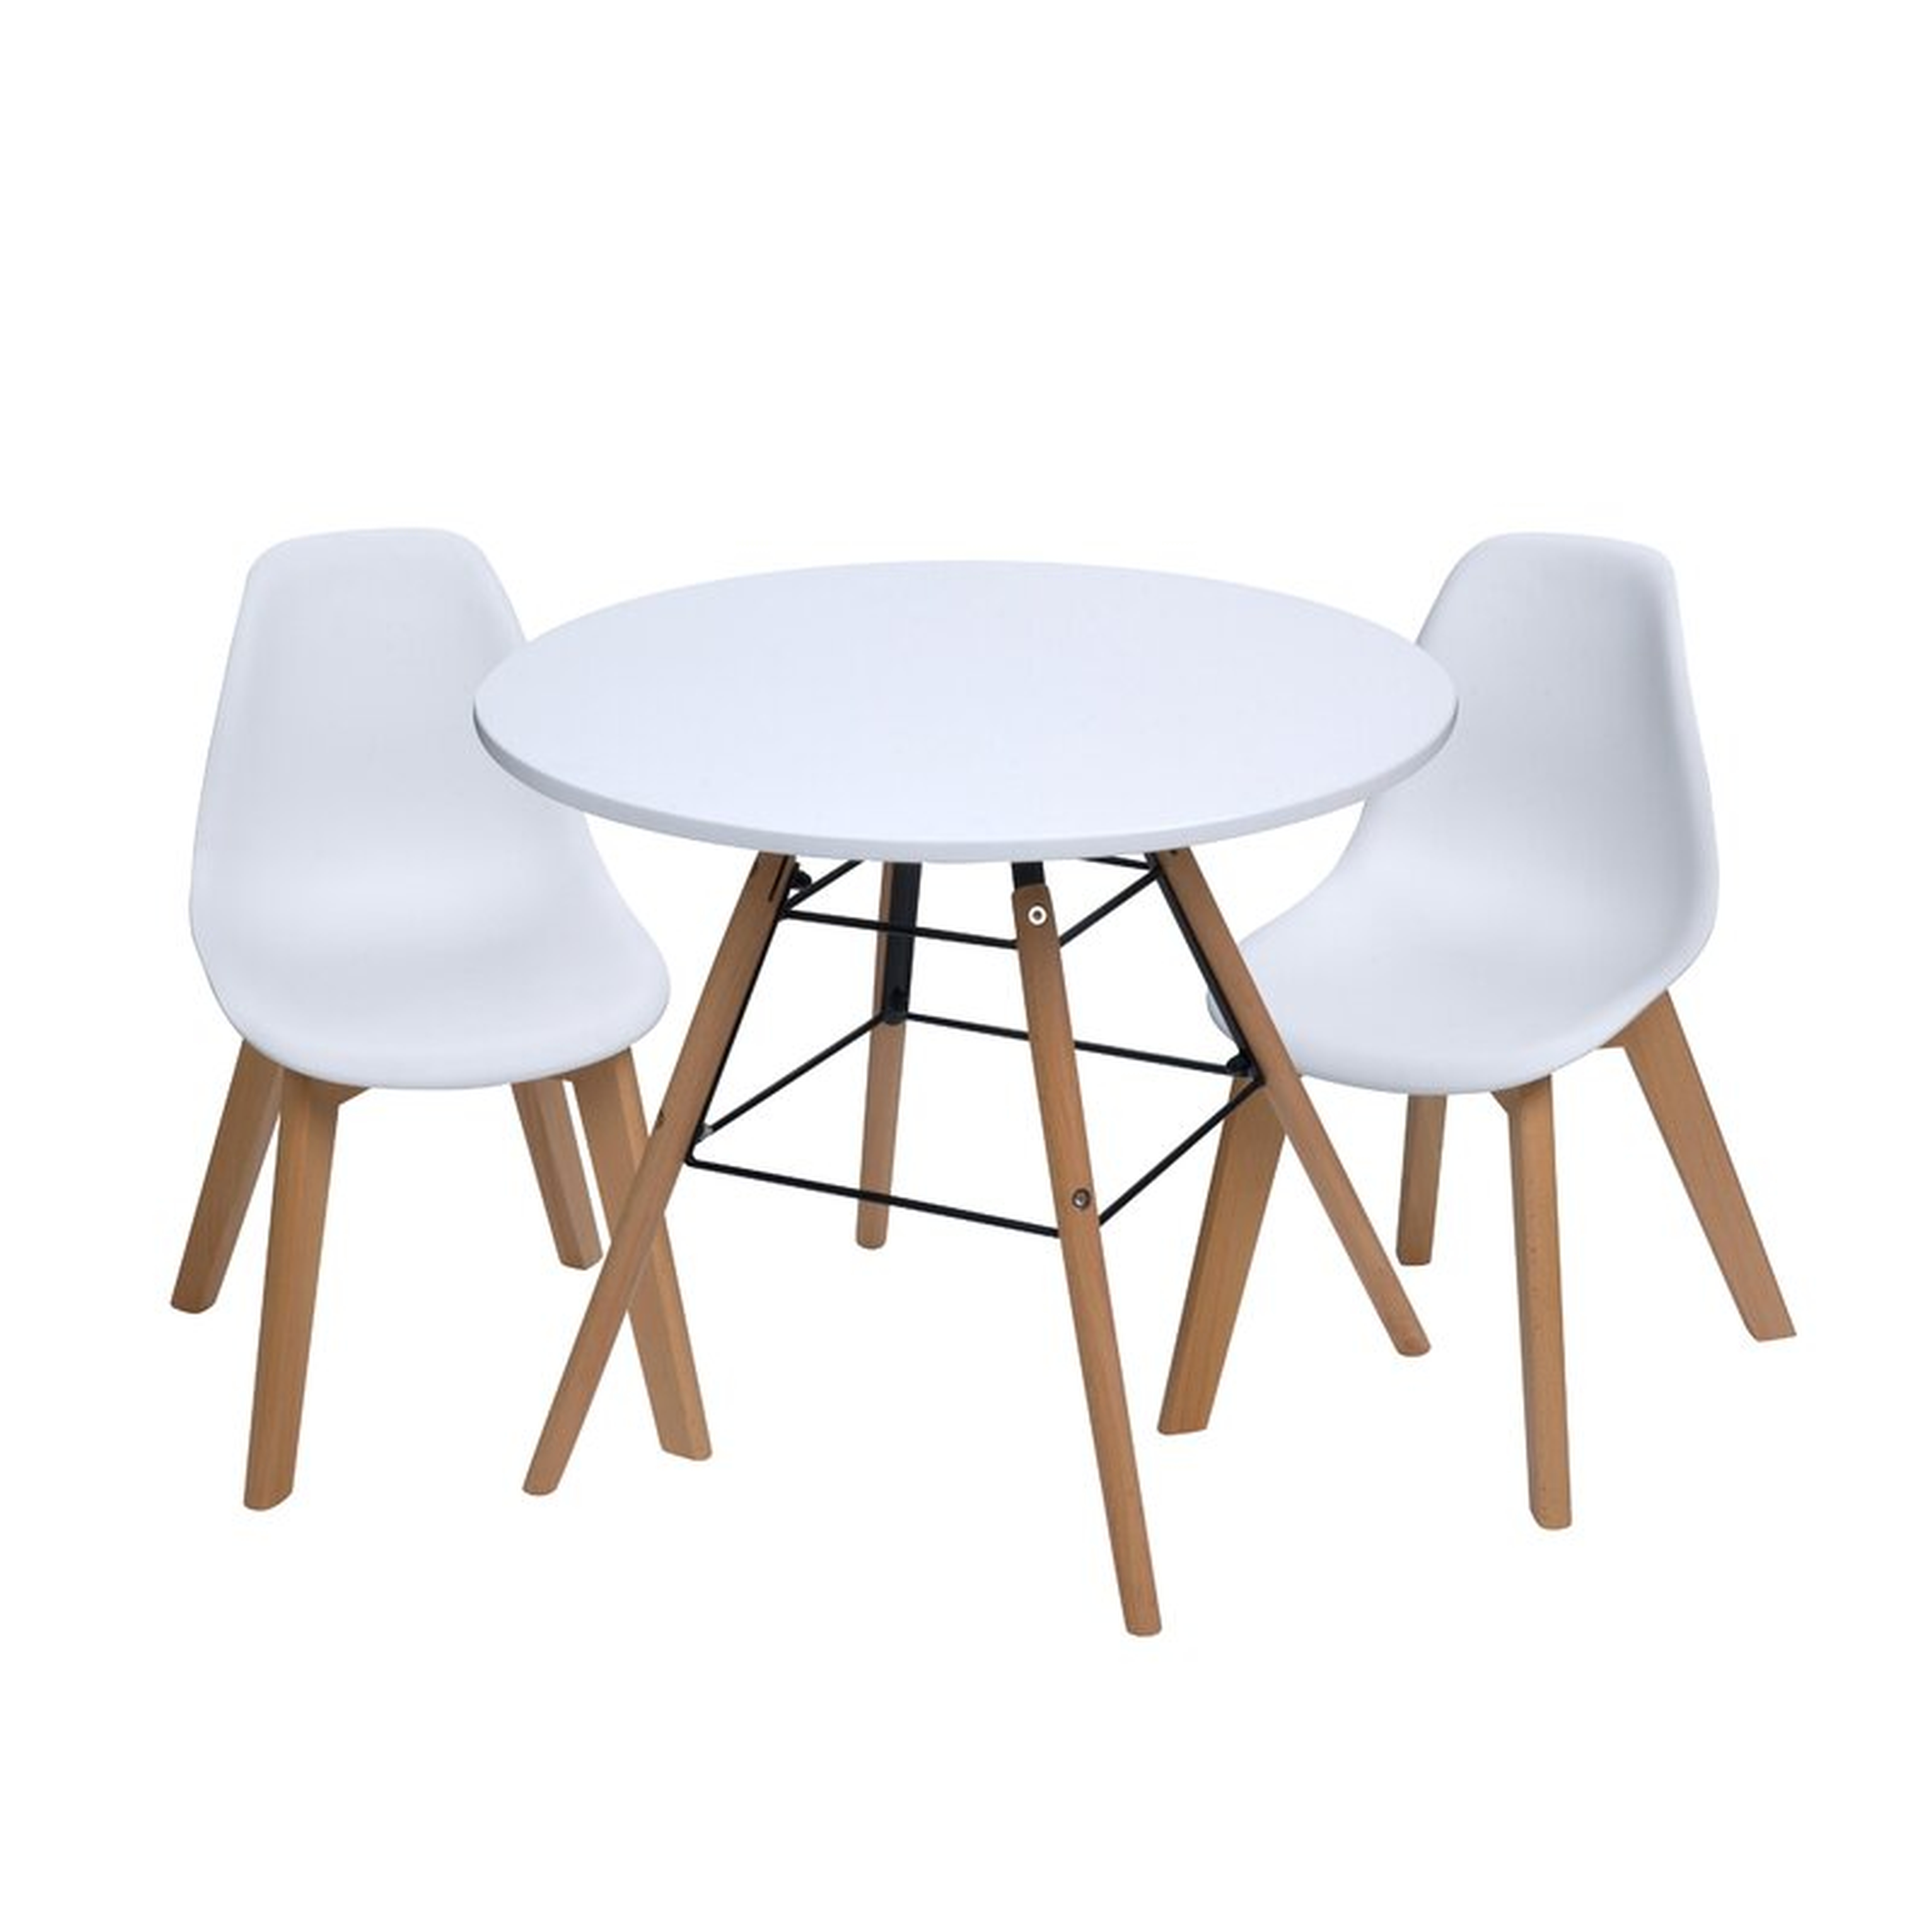 Letendre Kids 3 Piece Round Table and Chair Set - AllModern